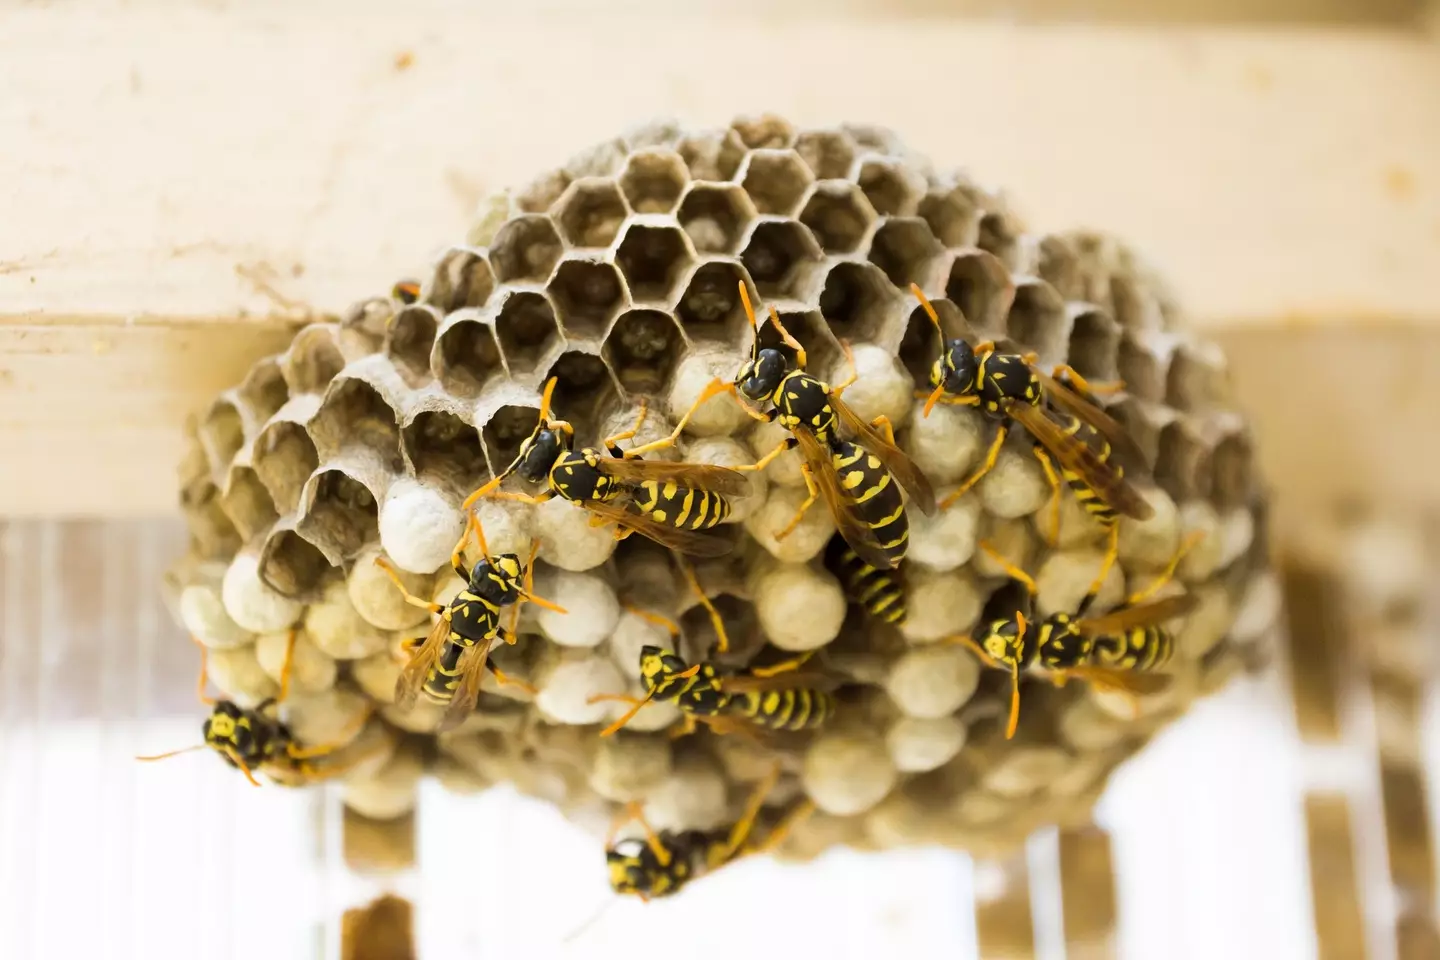 The 'sugar crazy' wasps are thought to invade at the end of summer.